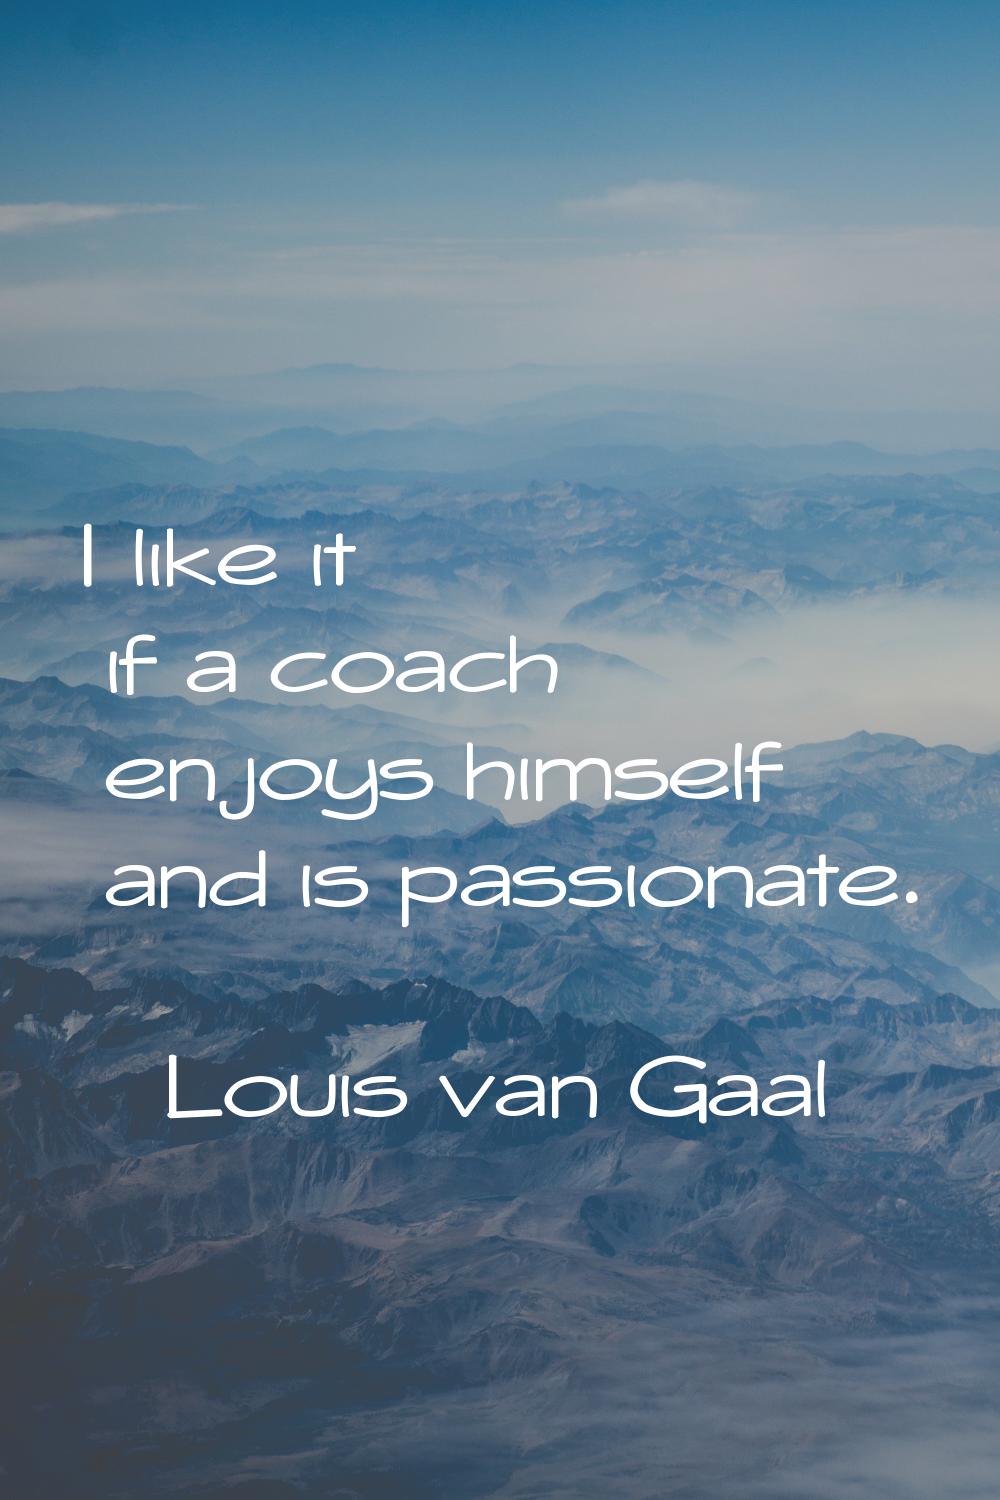 I like it if a coach enjoys himself and is passionate.